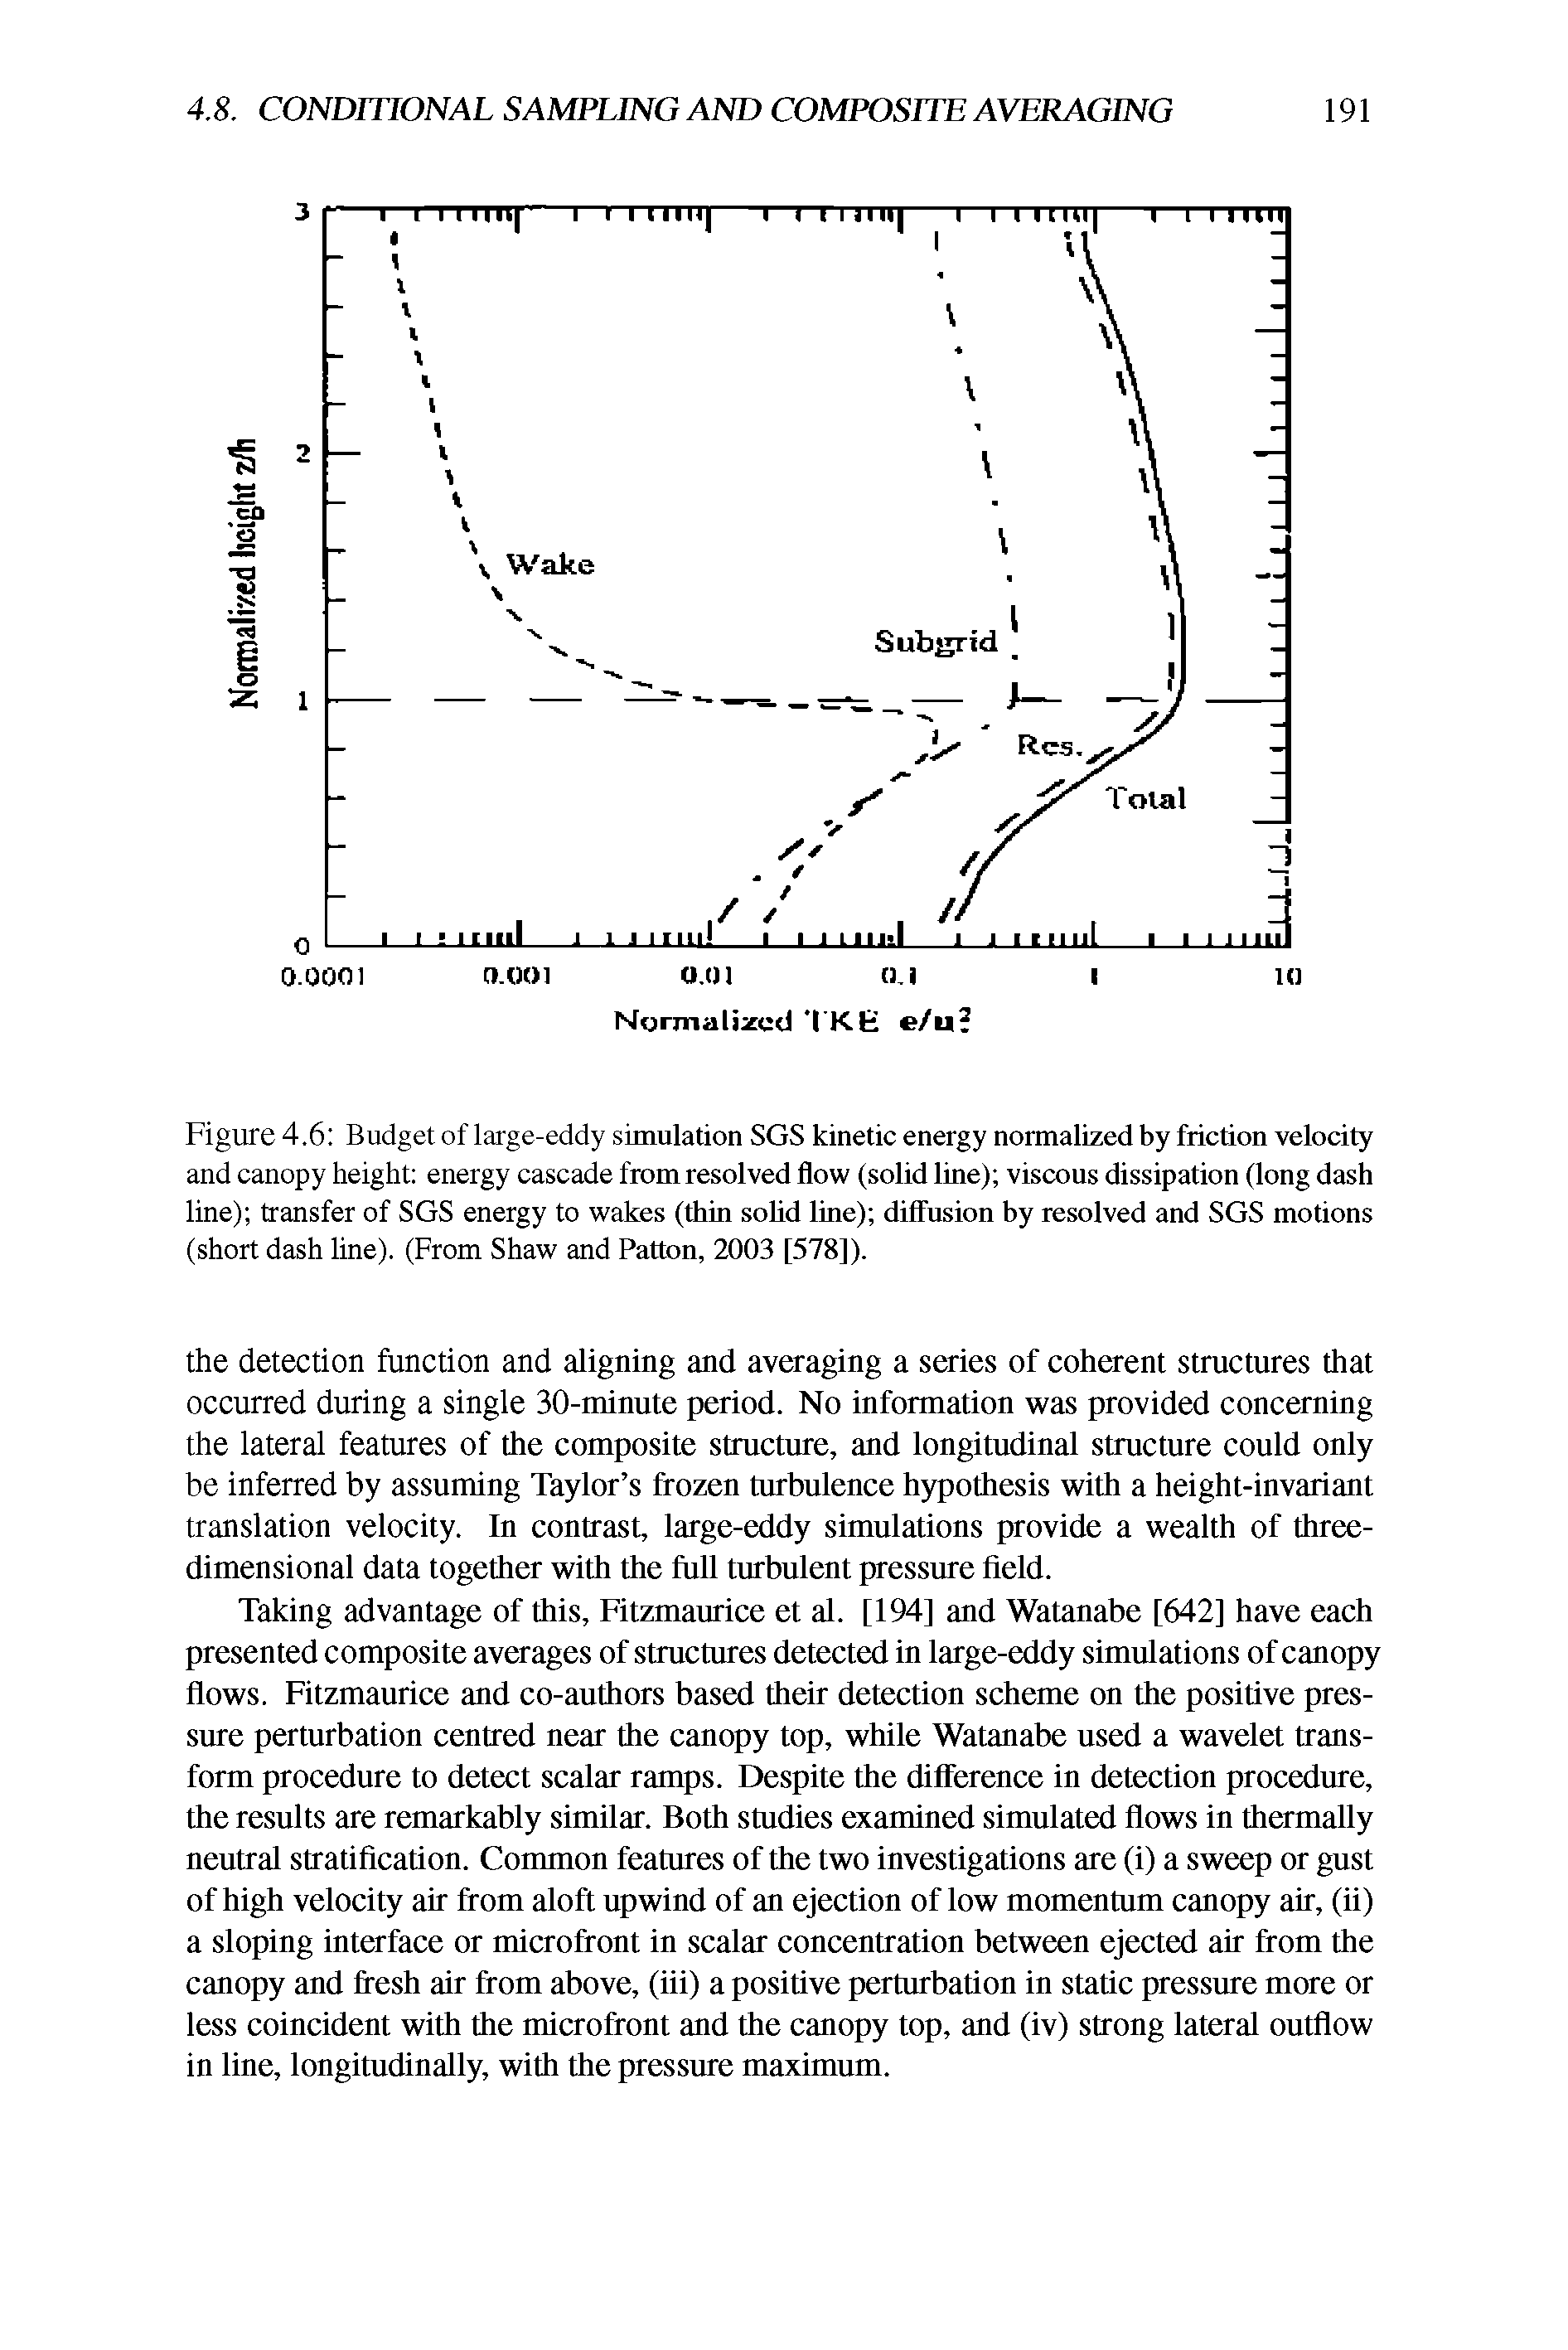 Figure 4.6 Budget of large-eddy simulation SGS kinetic energy normalized by friction velocity and canopy height energy cascade from resolved flow (solid line) viscous dissipation (long dash line) transfer of SGS energy to wakes (thin solid line) diffusion by resolved and SGS motions (short dash line). (From Shaw and Patton, 2003 [578]).